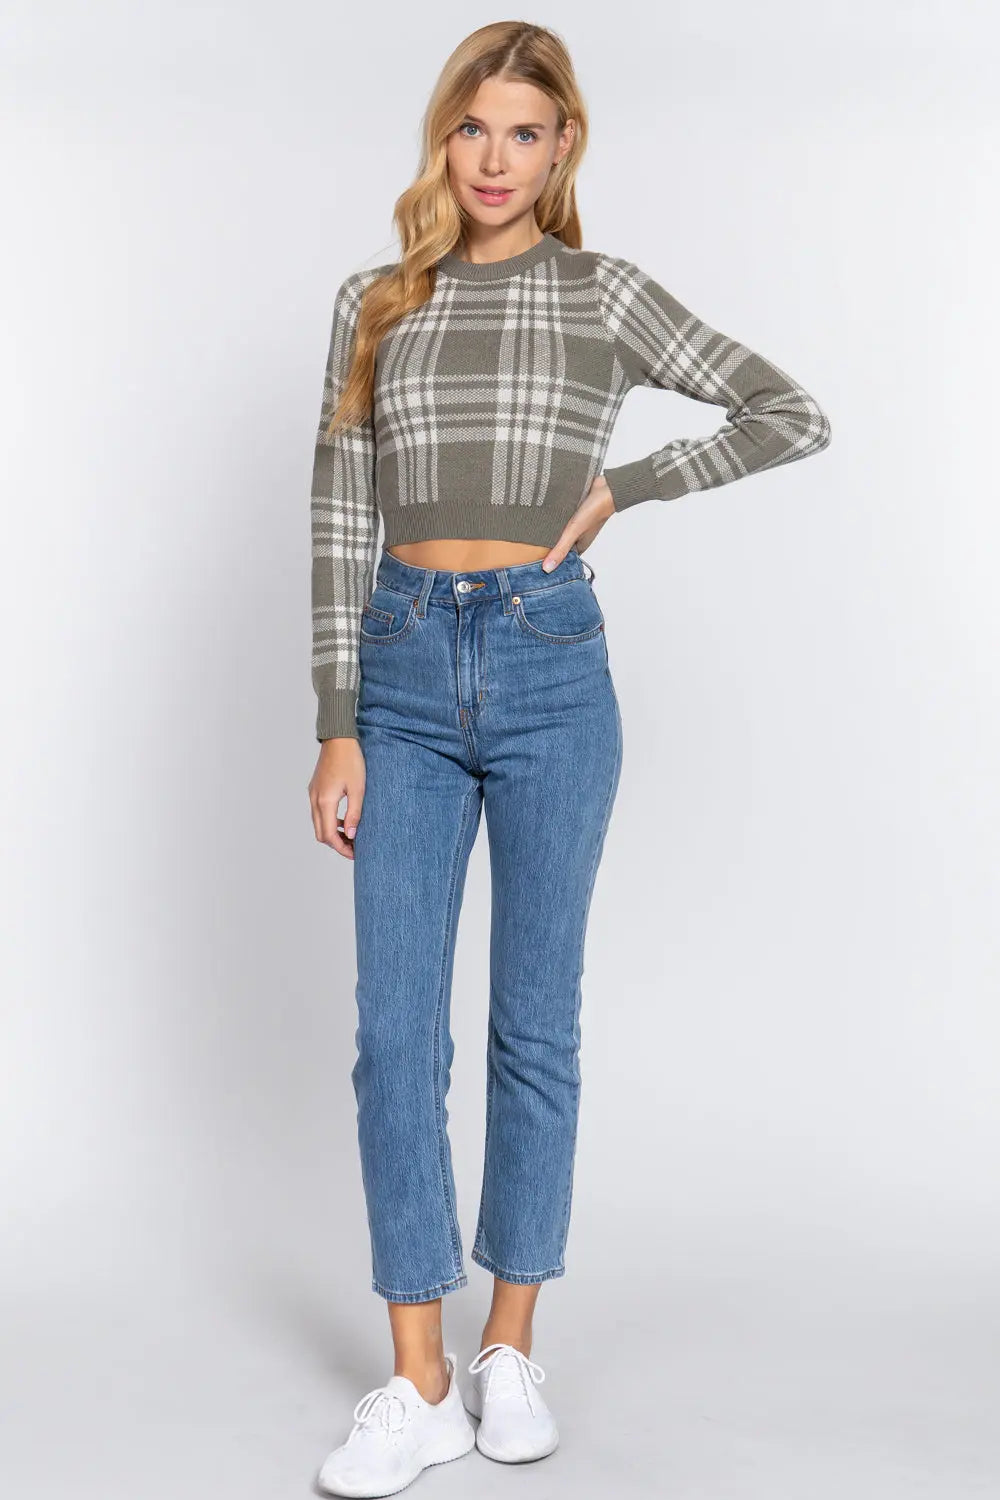 Long Slv Check Crop Sweater Sunny EvE Fashion